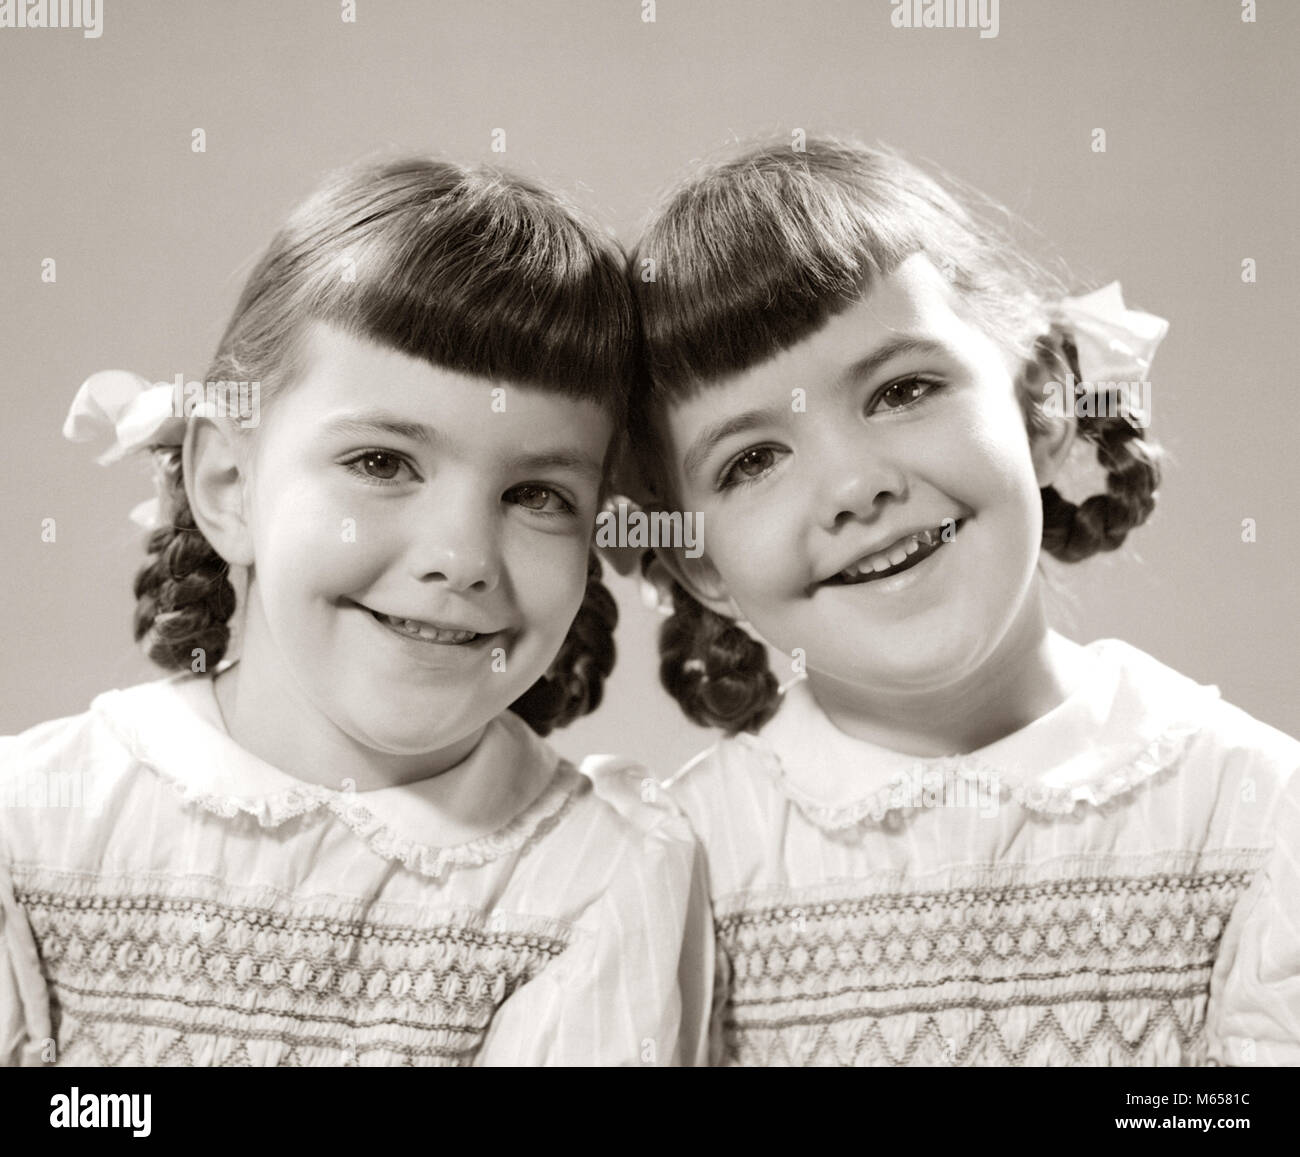 1940s 1950s SMILING TWIN GIRLS WITH PIGTAILS HEADS TOGETHER LOOKING AT CAMERA SMILING - j57 HAR001 HARS SISTERS NOSTALGIA TOGETHERNESS BRUNETTE MATCHING SAME HAPPINESS DIFFERENCE GROWTH SIBLING SMILES CONNECTION JOYFUL COOPERATION LOOK-ALIKE BRAIDS DUPLICATE JUVENILES LOOK ALIKE PIGTAIL PIGTAILS B&W BANGS BIGGER BLACK AND WHITE CAUCASIAN ETHNICITY CLONE HEAD TO HEAD LOOKING AT CAMERA OLD FASHIONED SAMENESS SMALLER SMOCKING Stock Photo